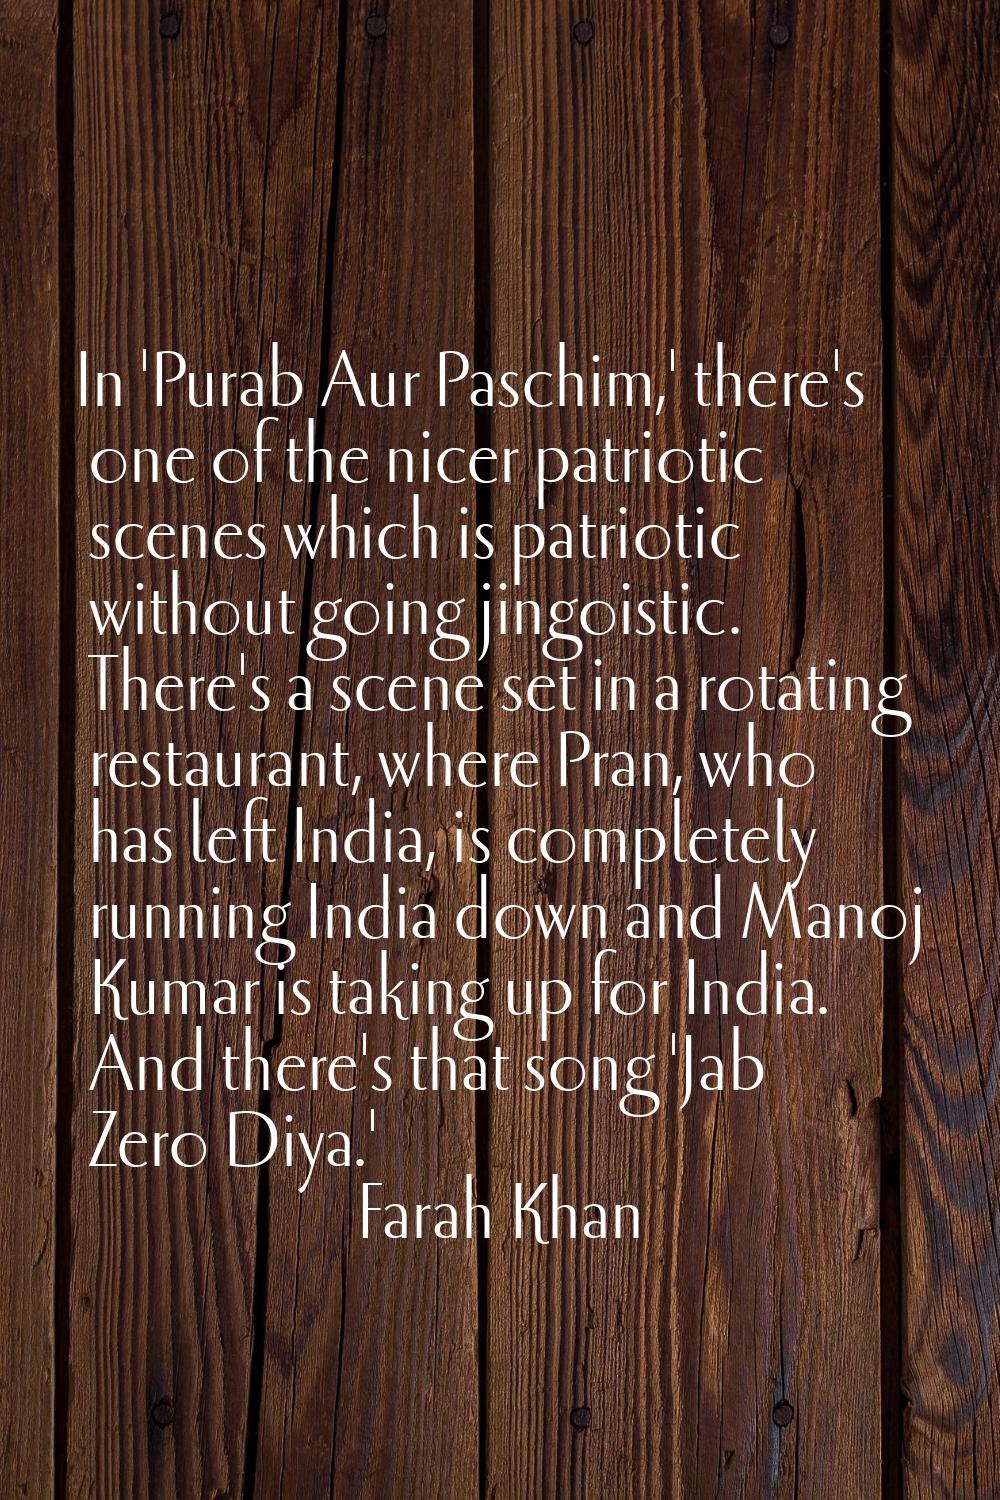 In 'Purab Aur Paschim,' there's one of the nicer patriotic scenes which is patriotic without going 